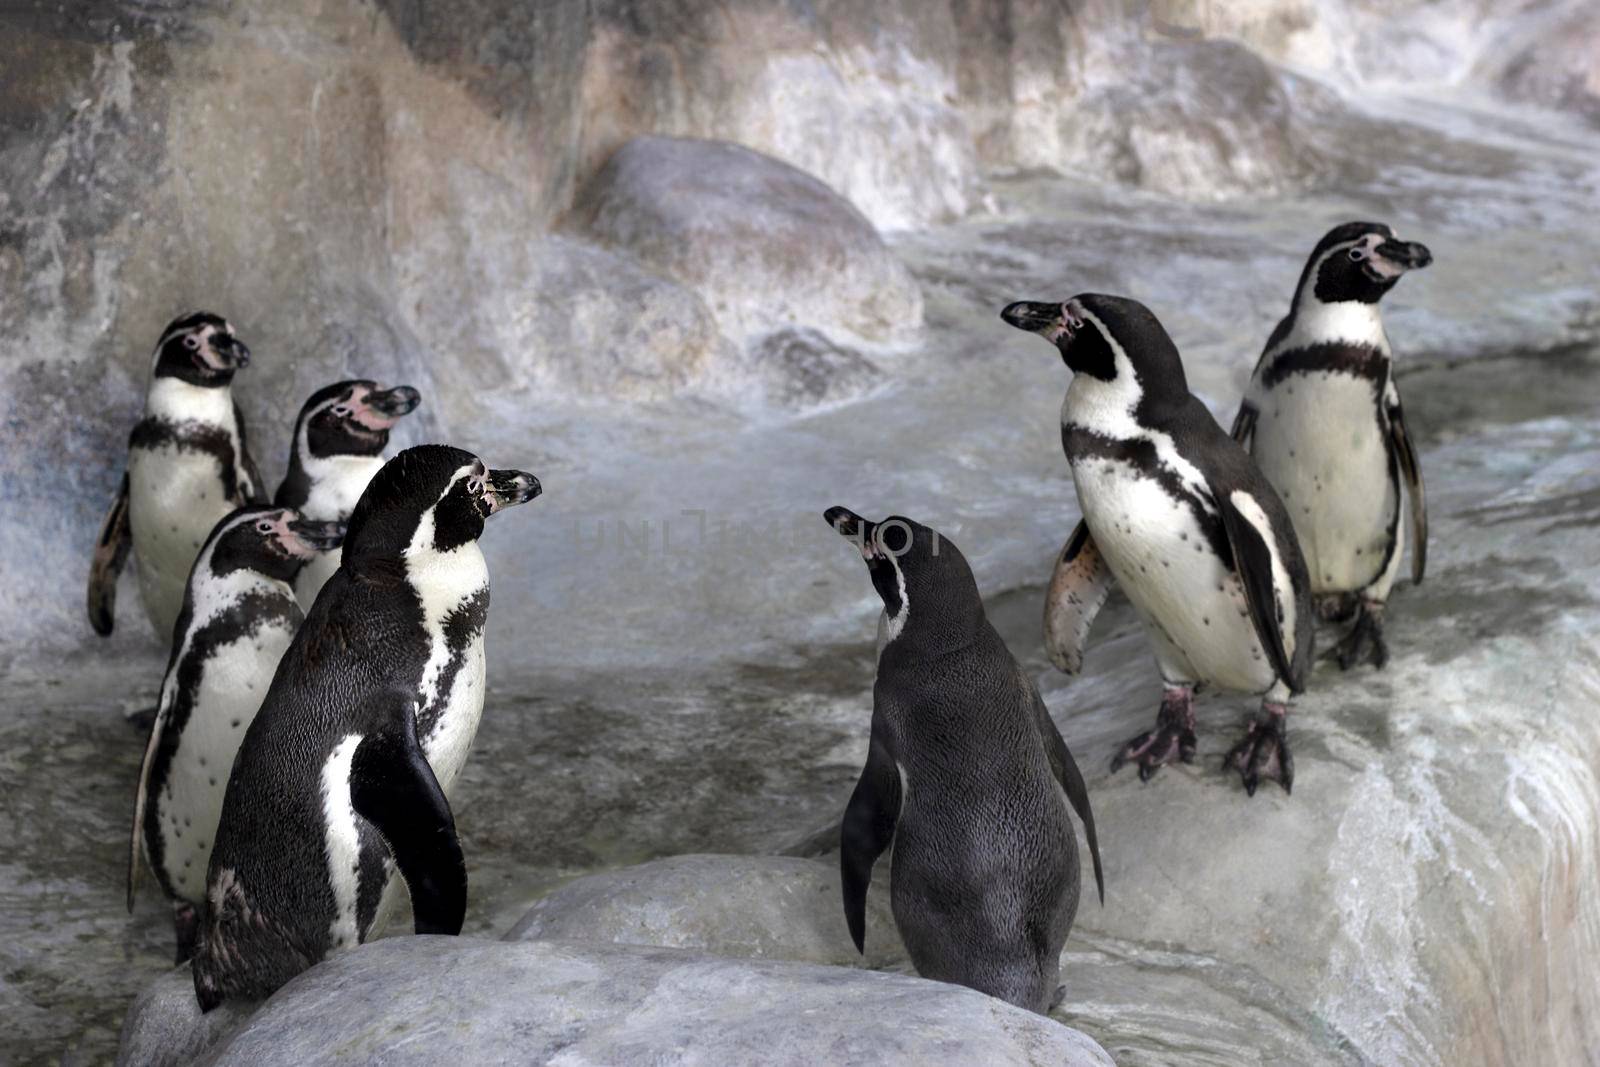 Group of Galapagos penguins stand in the zoo's enclosure